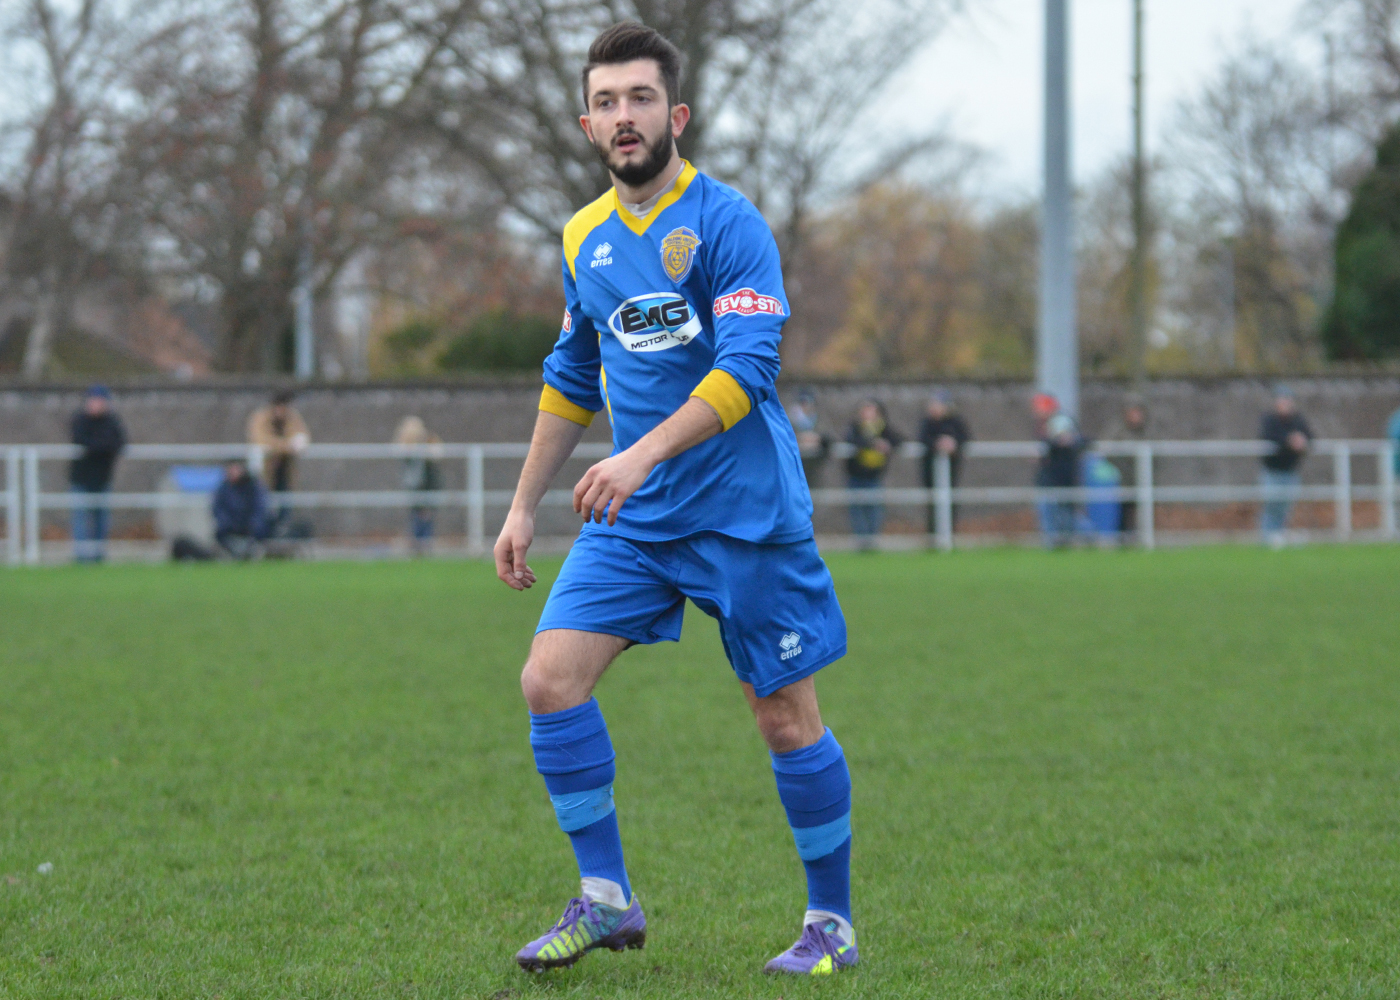 STAR MAN: Dan Banister was industrious for Spalding United. Photo by JAKE WHITELEY